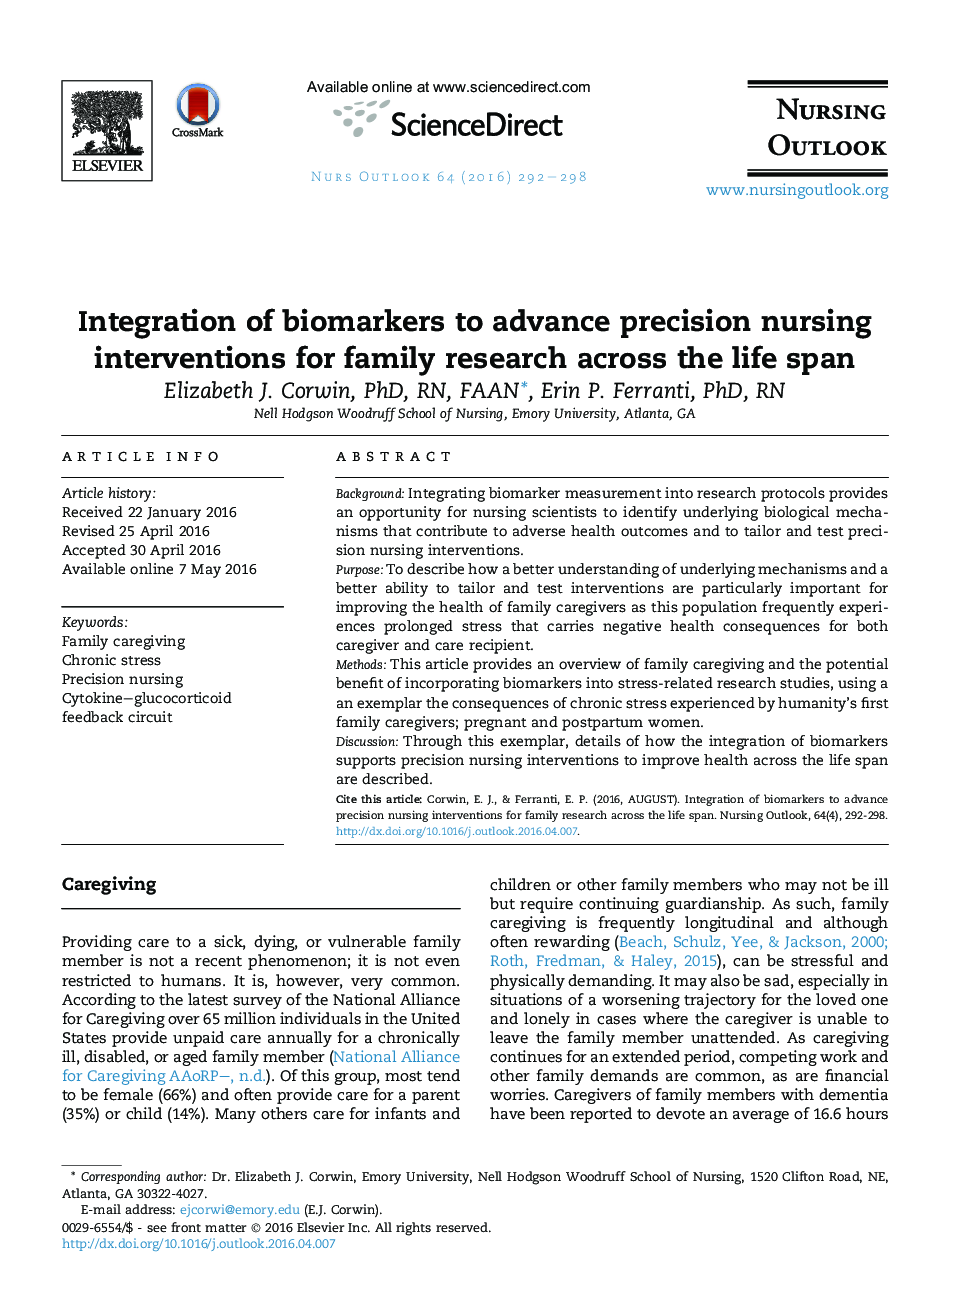 Integration of biomarkers to advance precision nursing interventions for family research across the life span